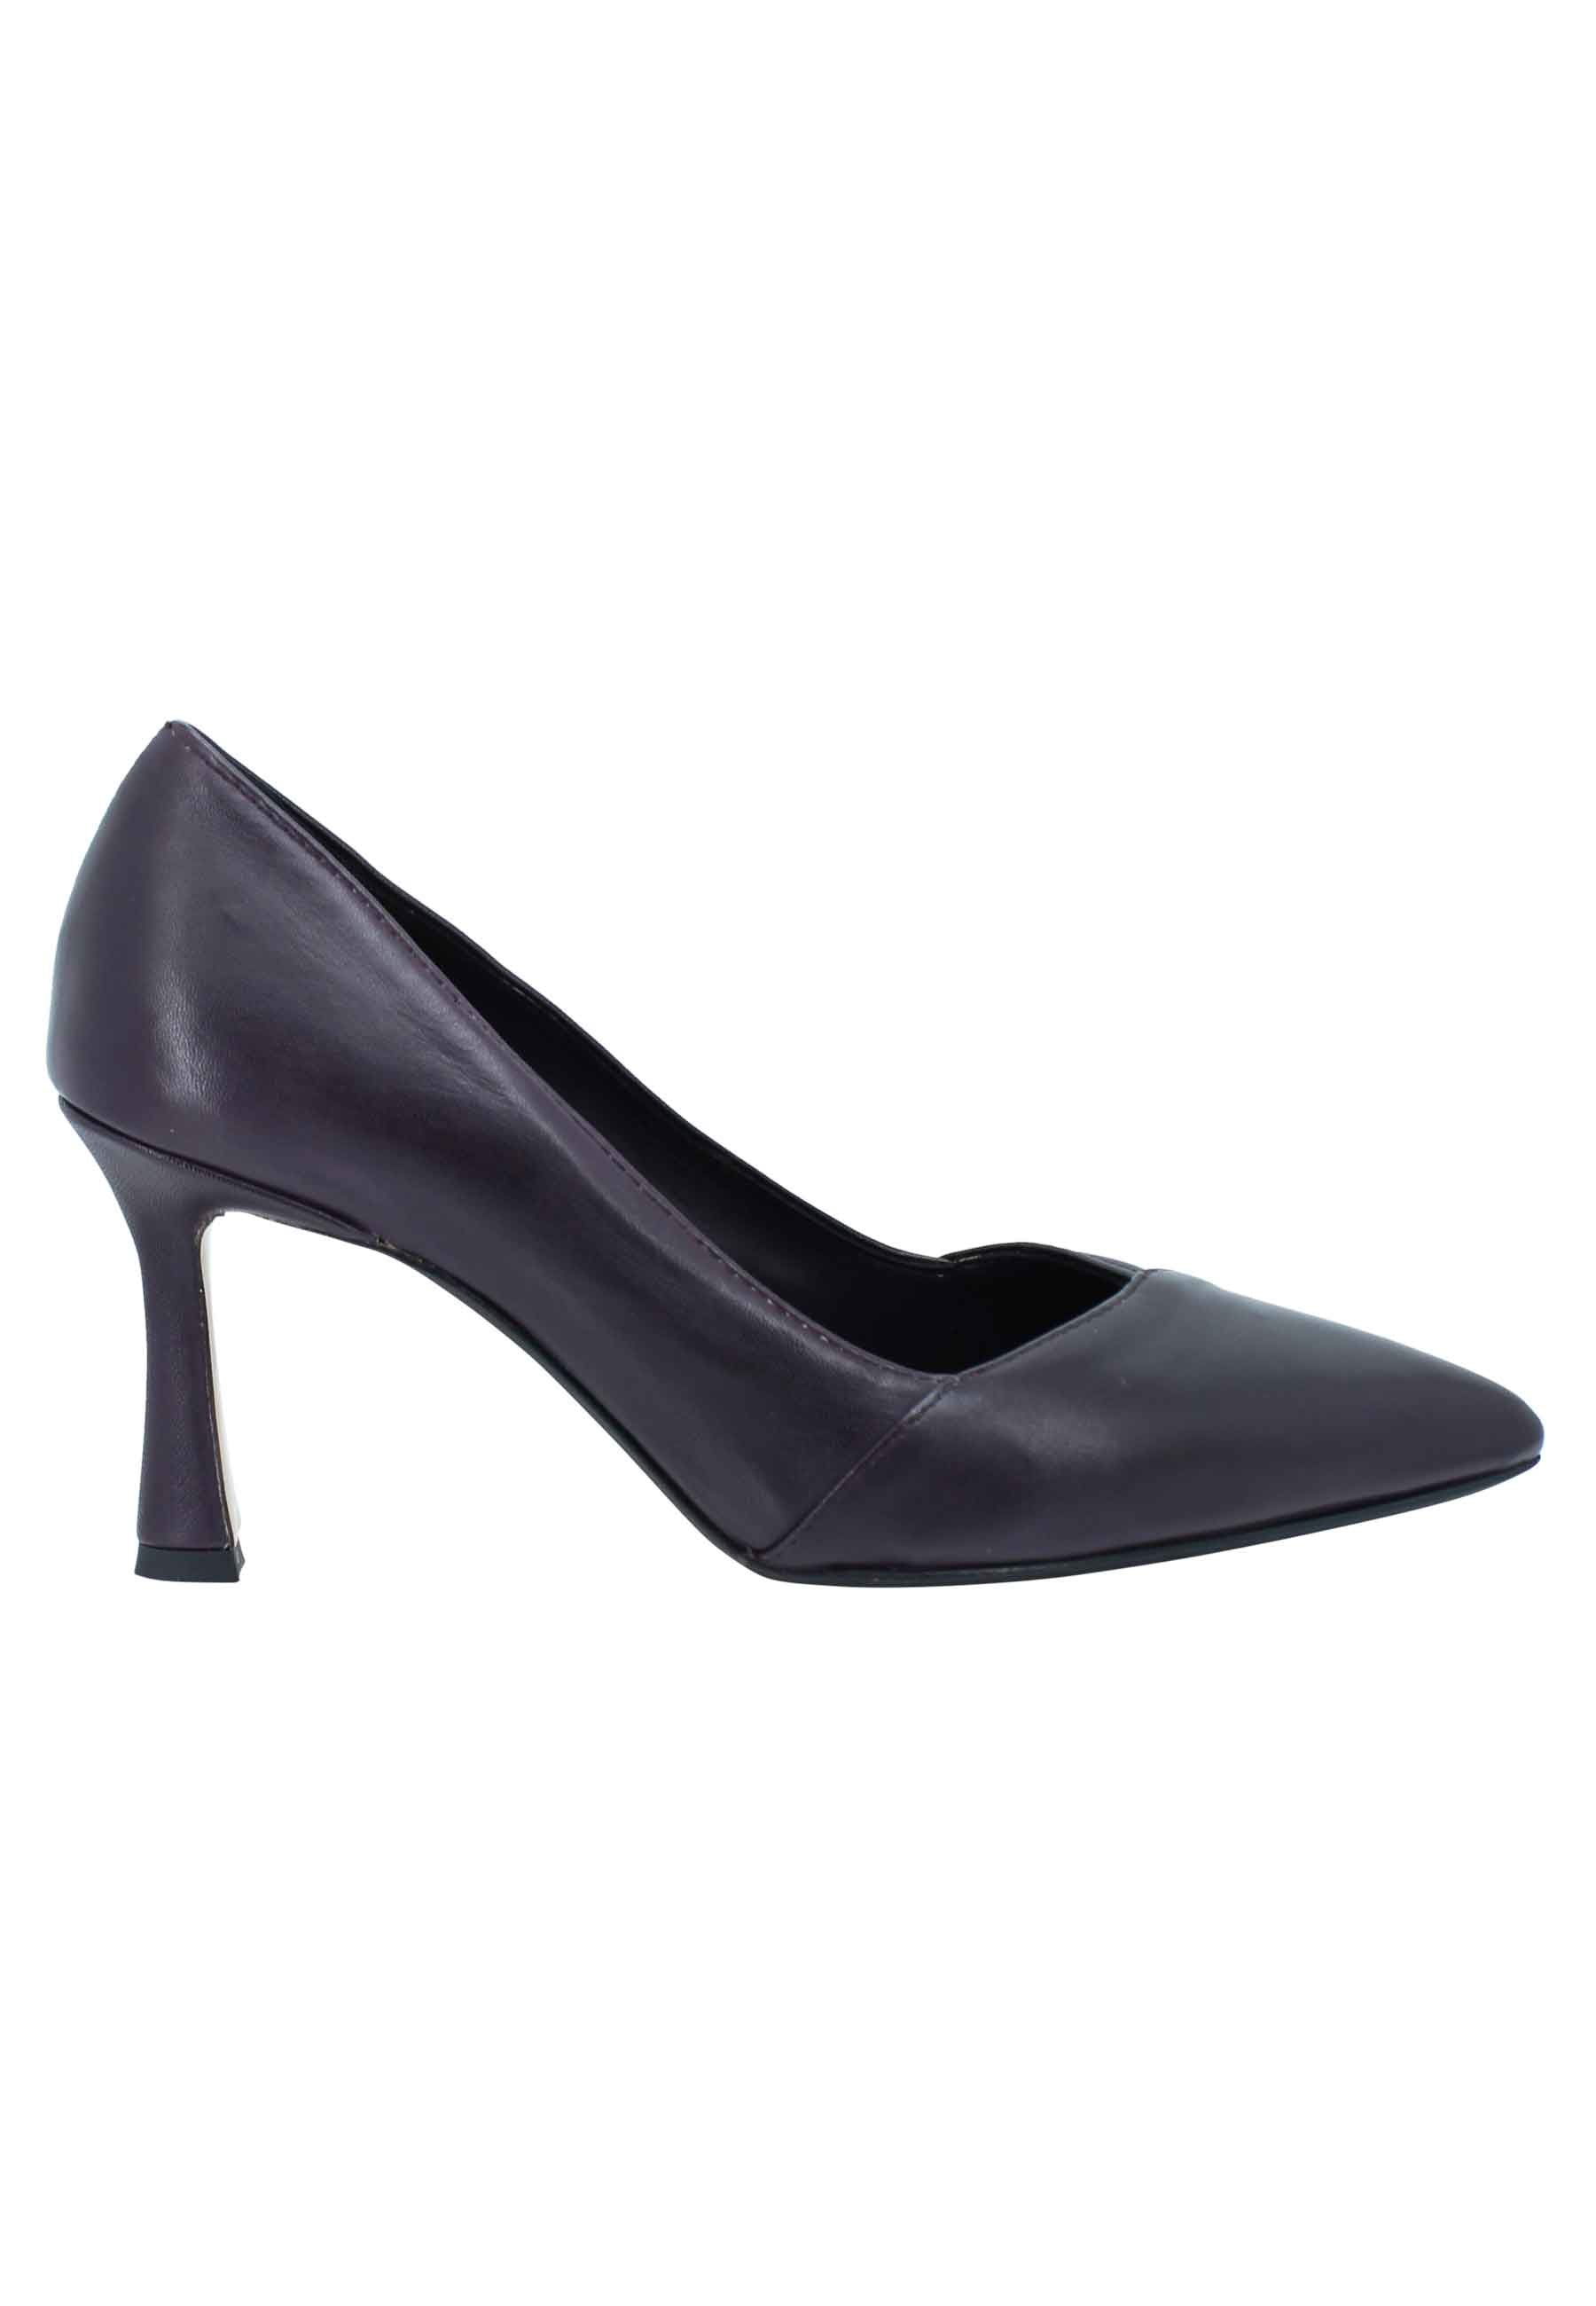 Women's high heel plum leather pumps with pointed toe